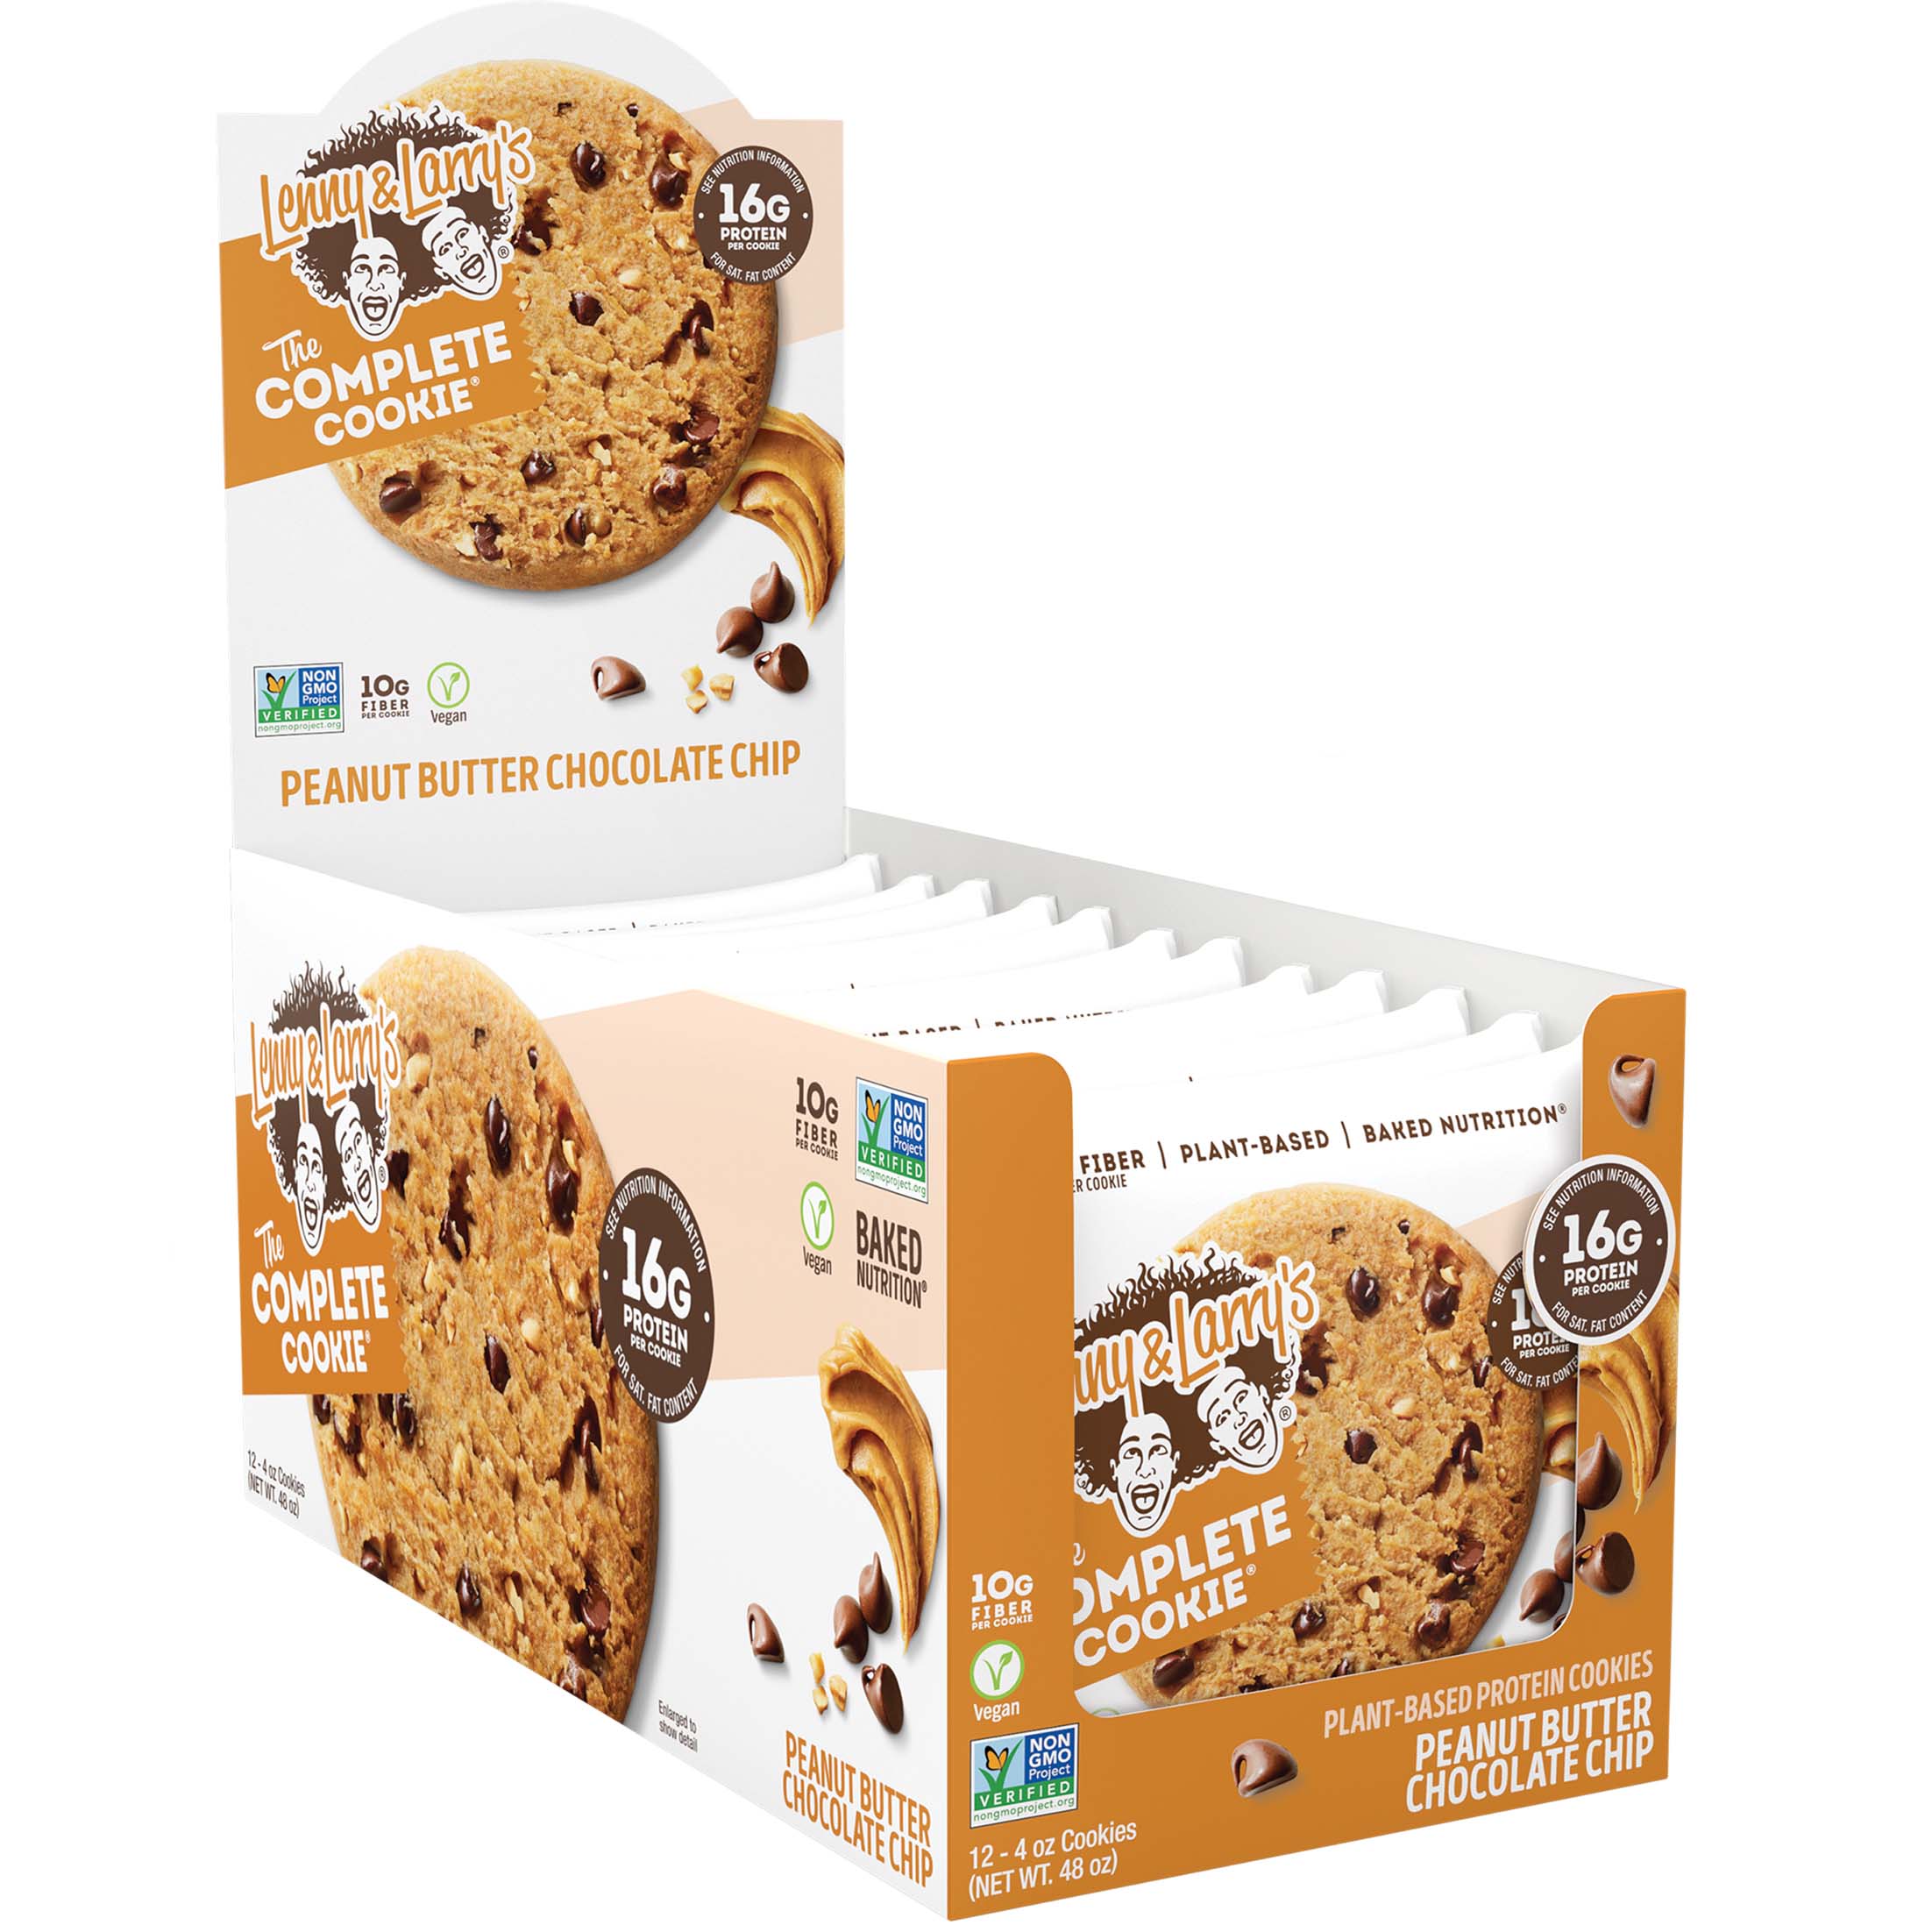 Lenny & Larry’s Complete Cookies Box of 12 Pieces Peanut Butter Choco Chip